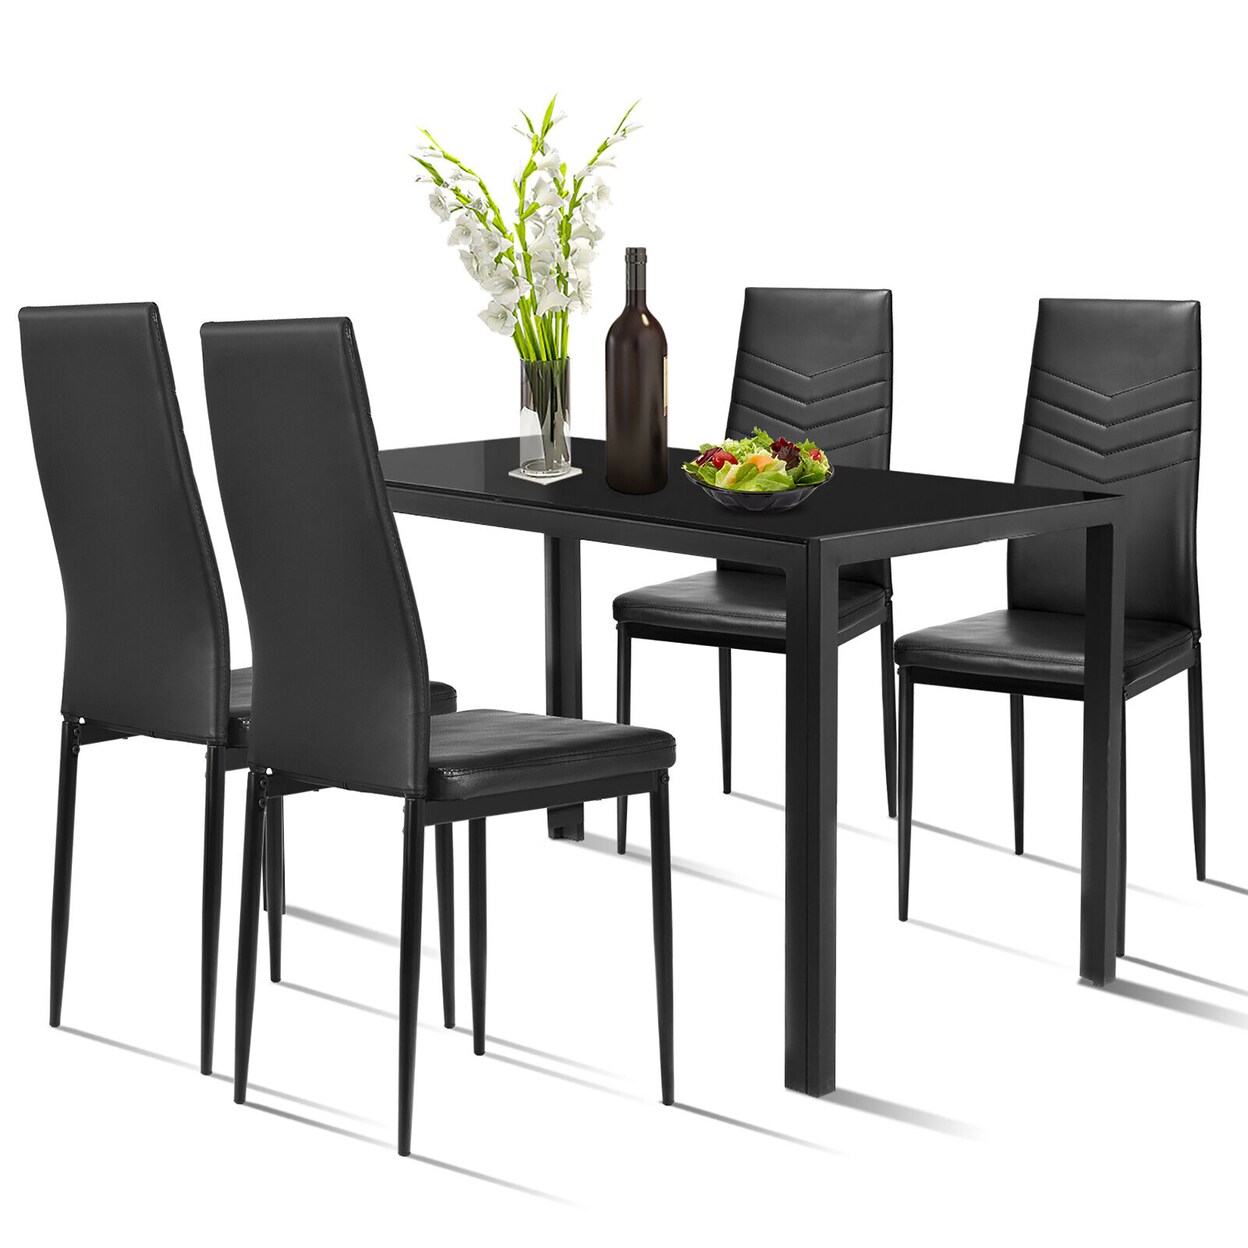 Gymax 5 Piece Kitchen Dining Set Glass Metal Table and 4 Chairs Breakfast Furniture